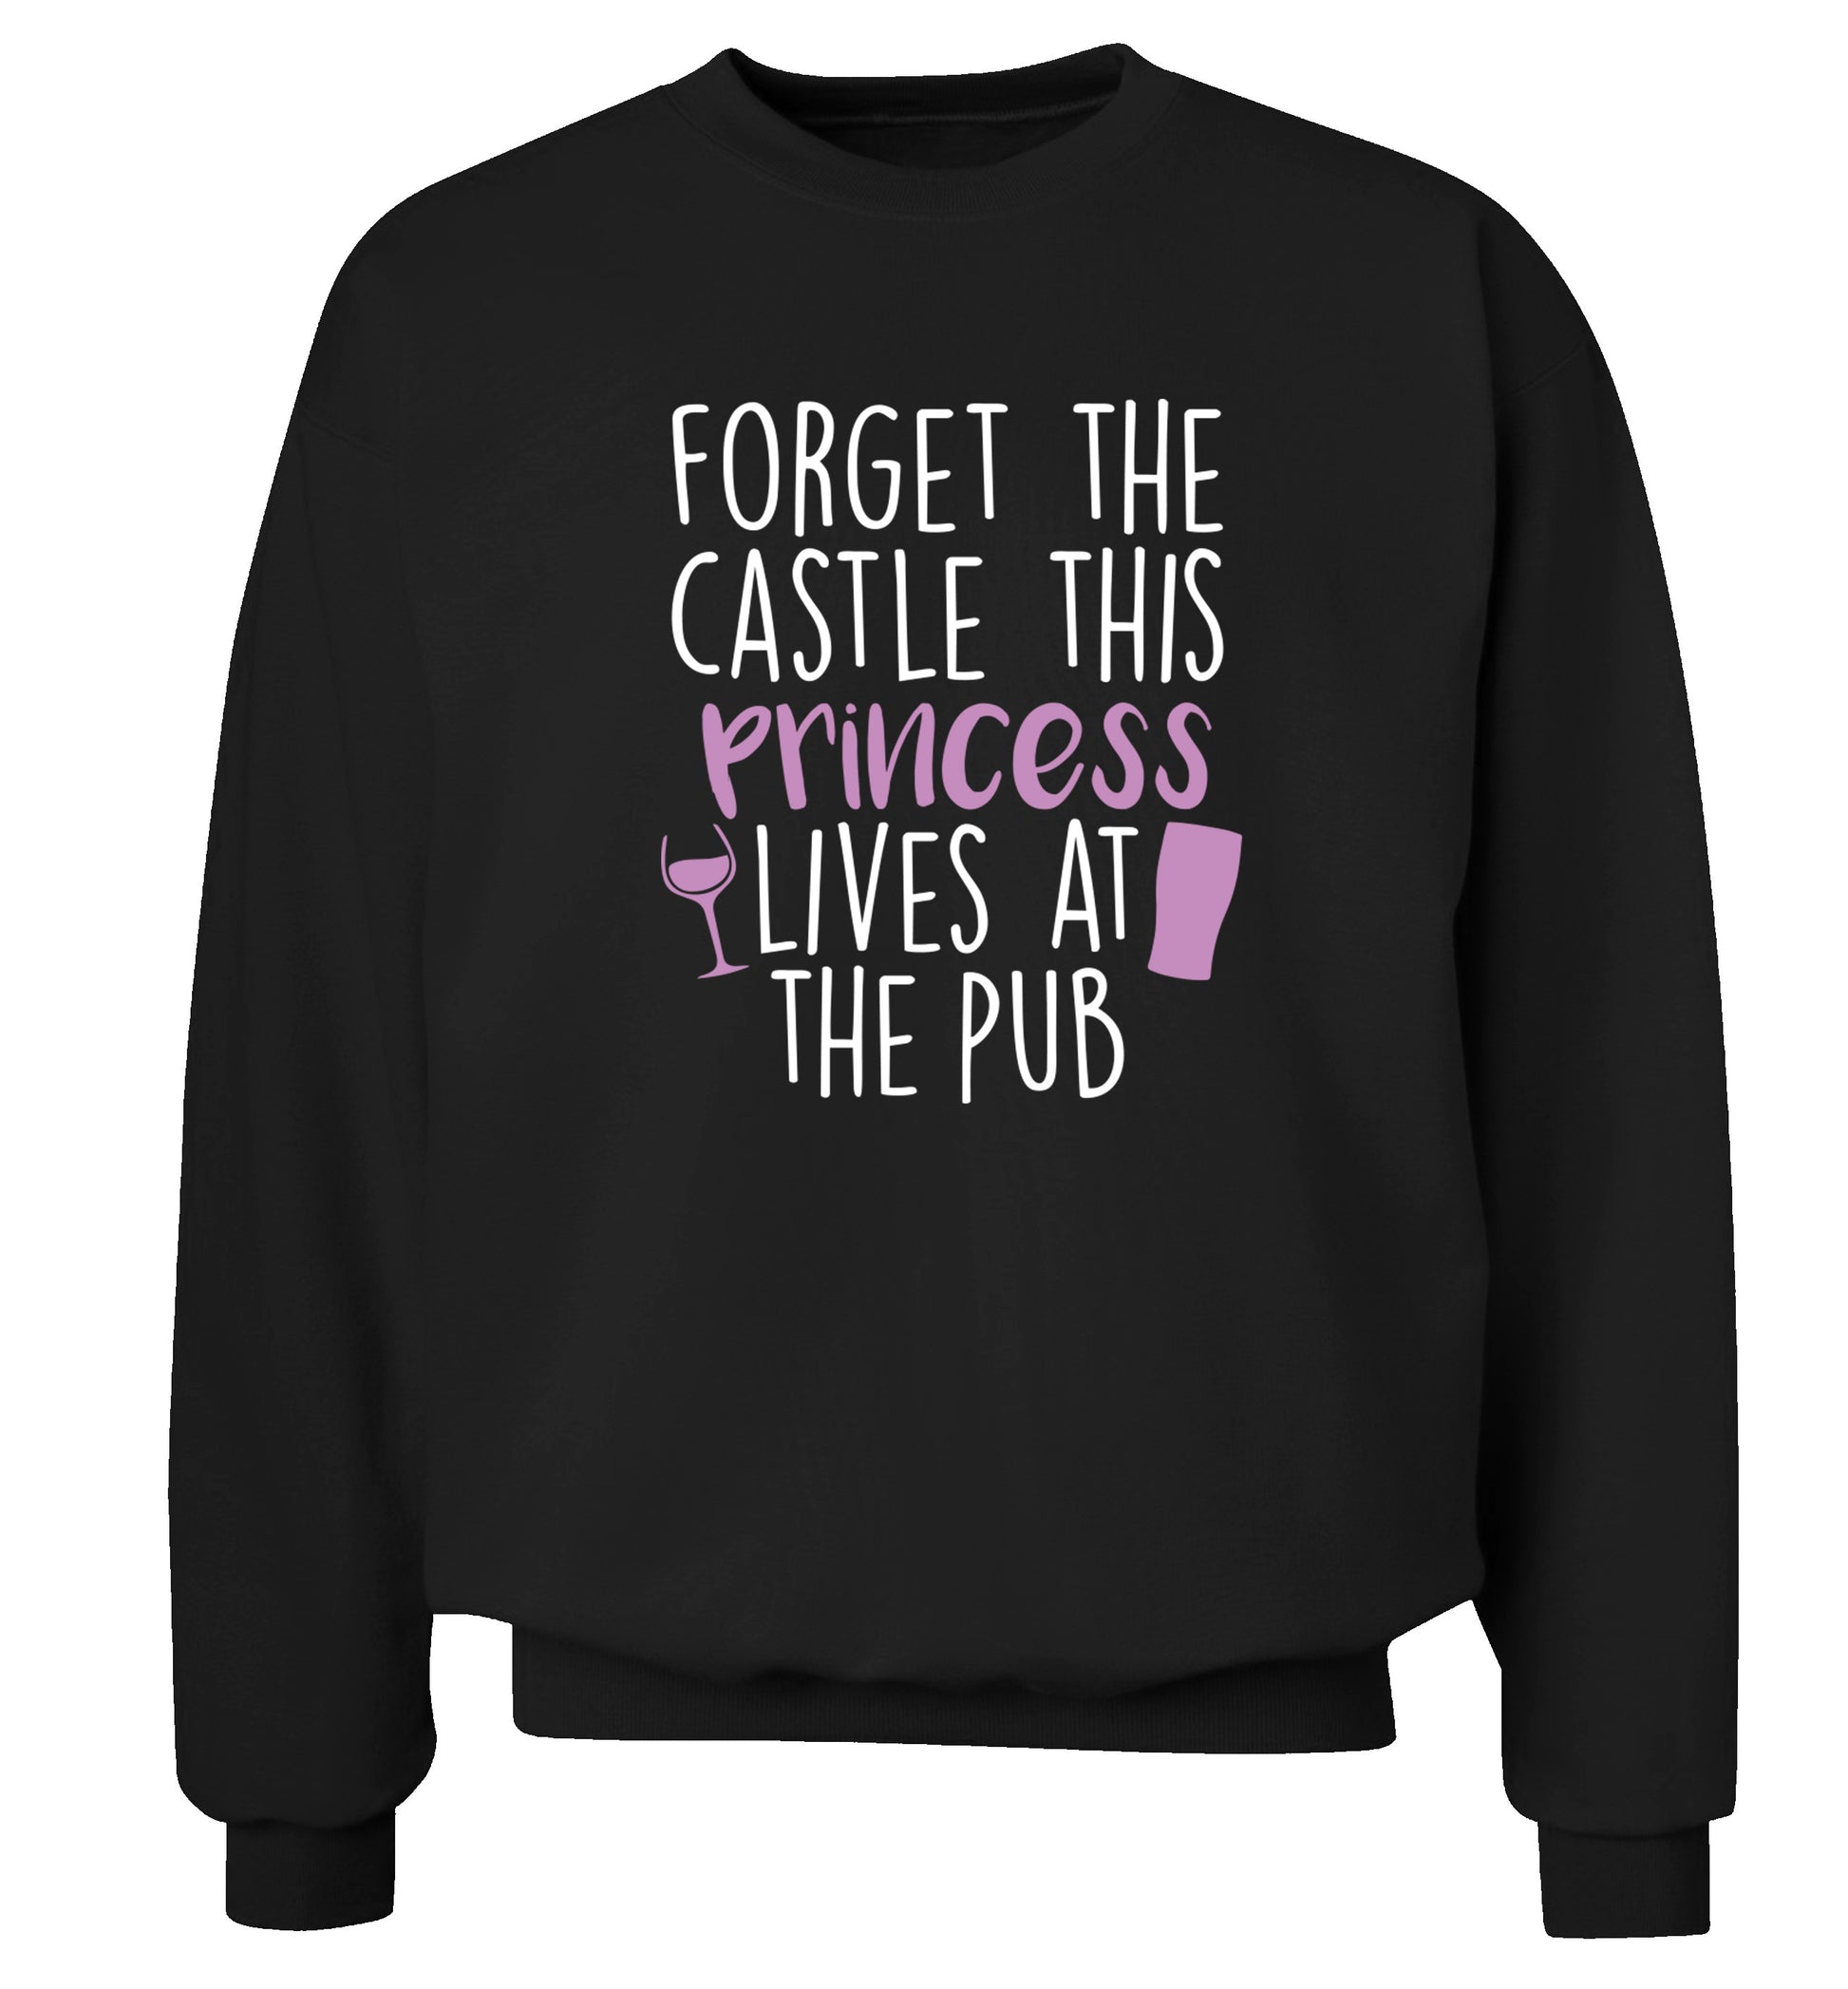 Forget the castle this princess lives at the pub Adult's unisex black Sweater 2XL